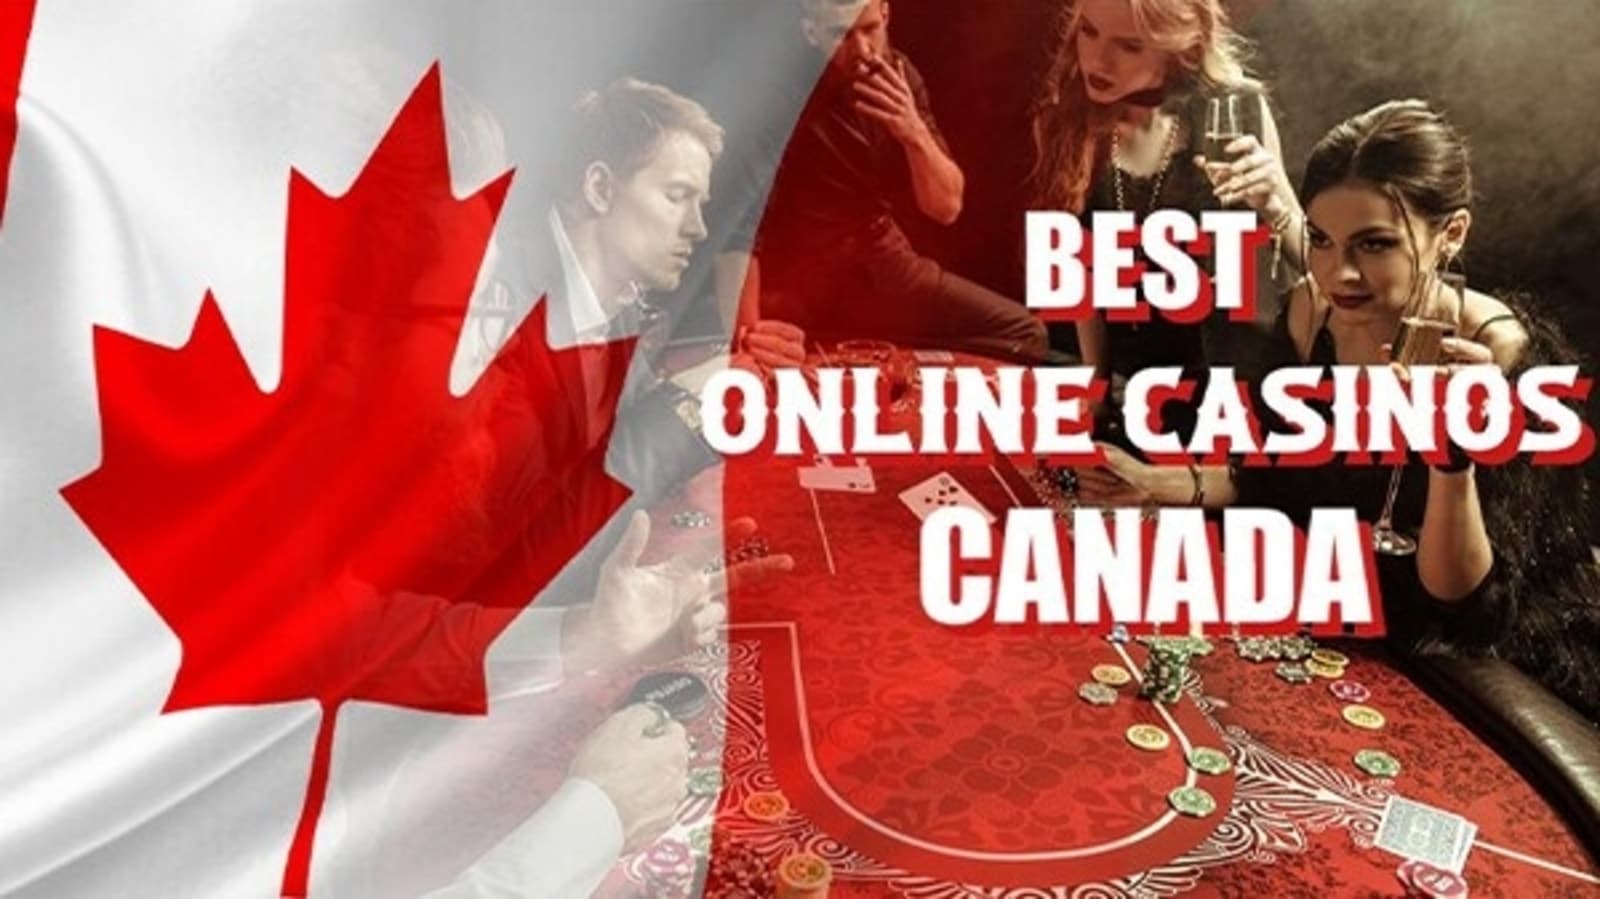 World Class Tools Make online casinos Canada Push Button Easy